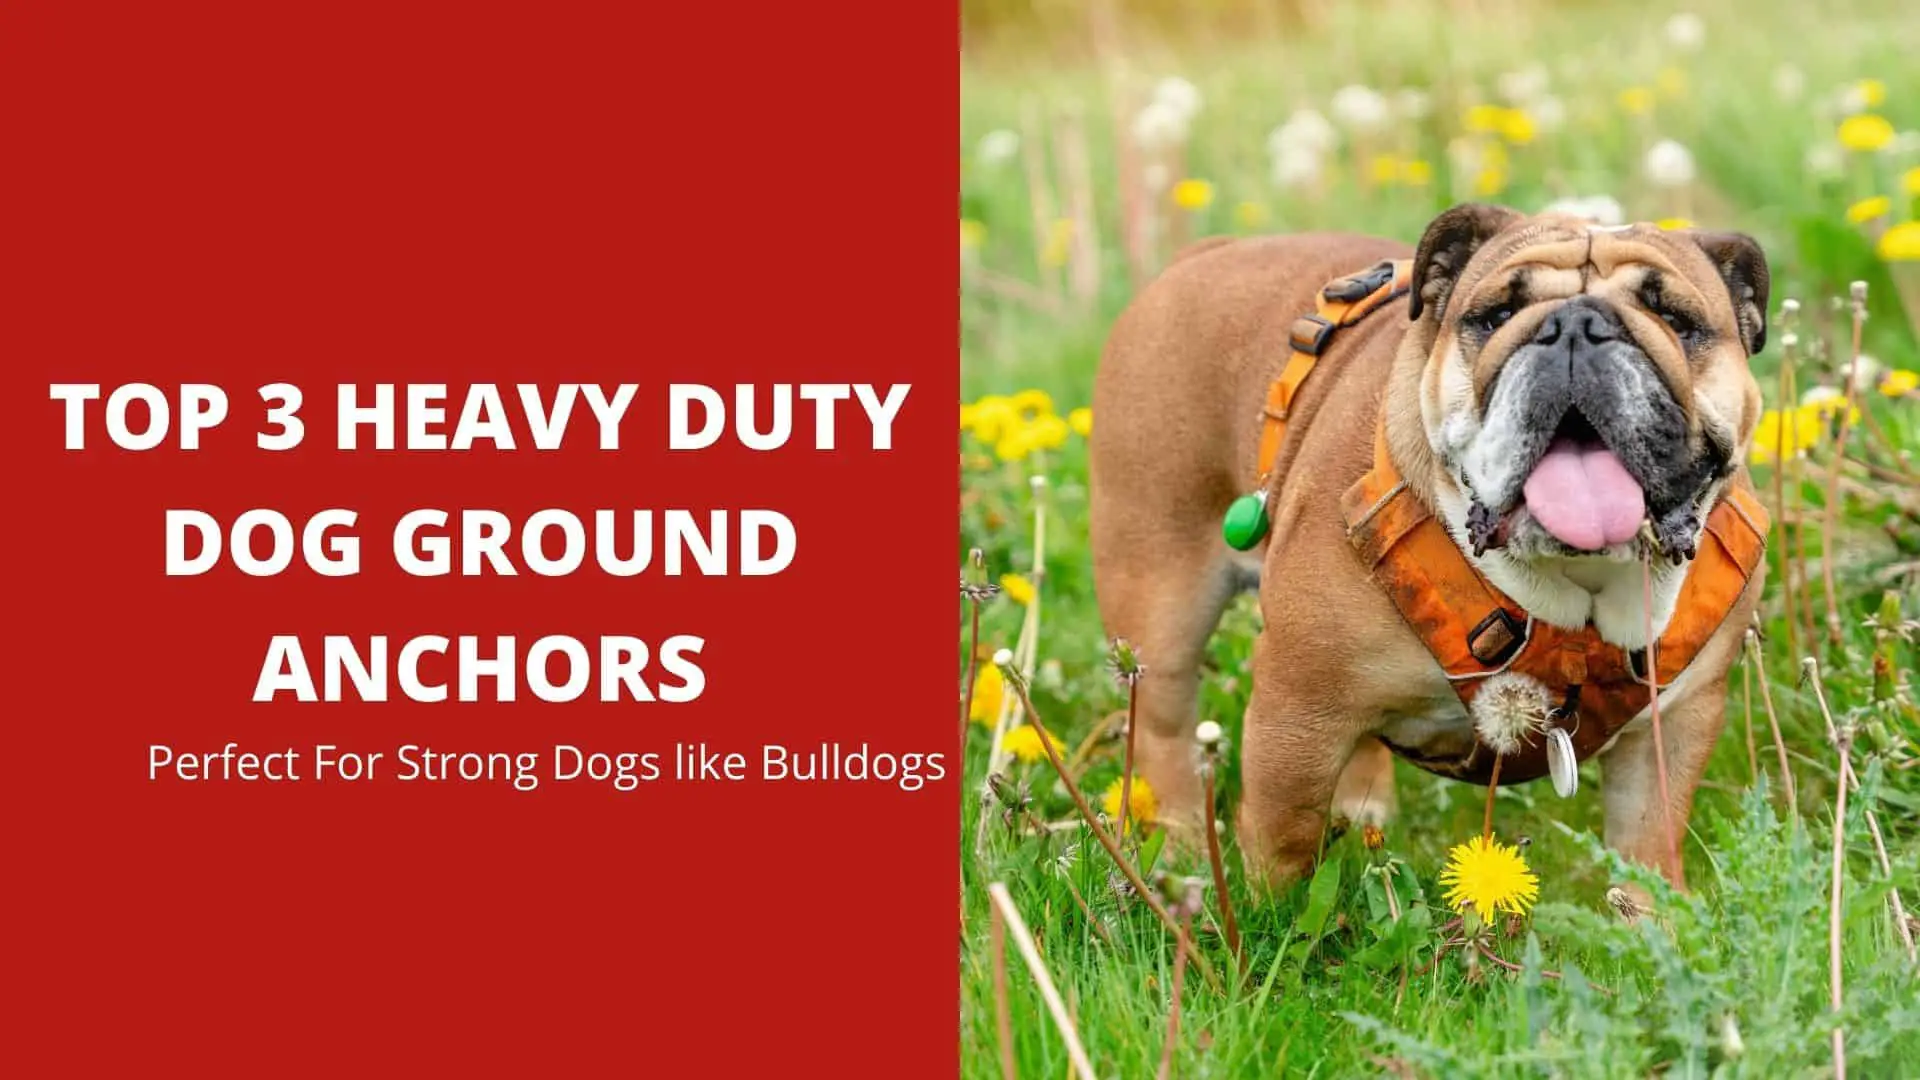 Top 3 Heavy Duty Dog Ground Anchors Perfect For Strong Dogs like Bulldogs